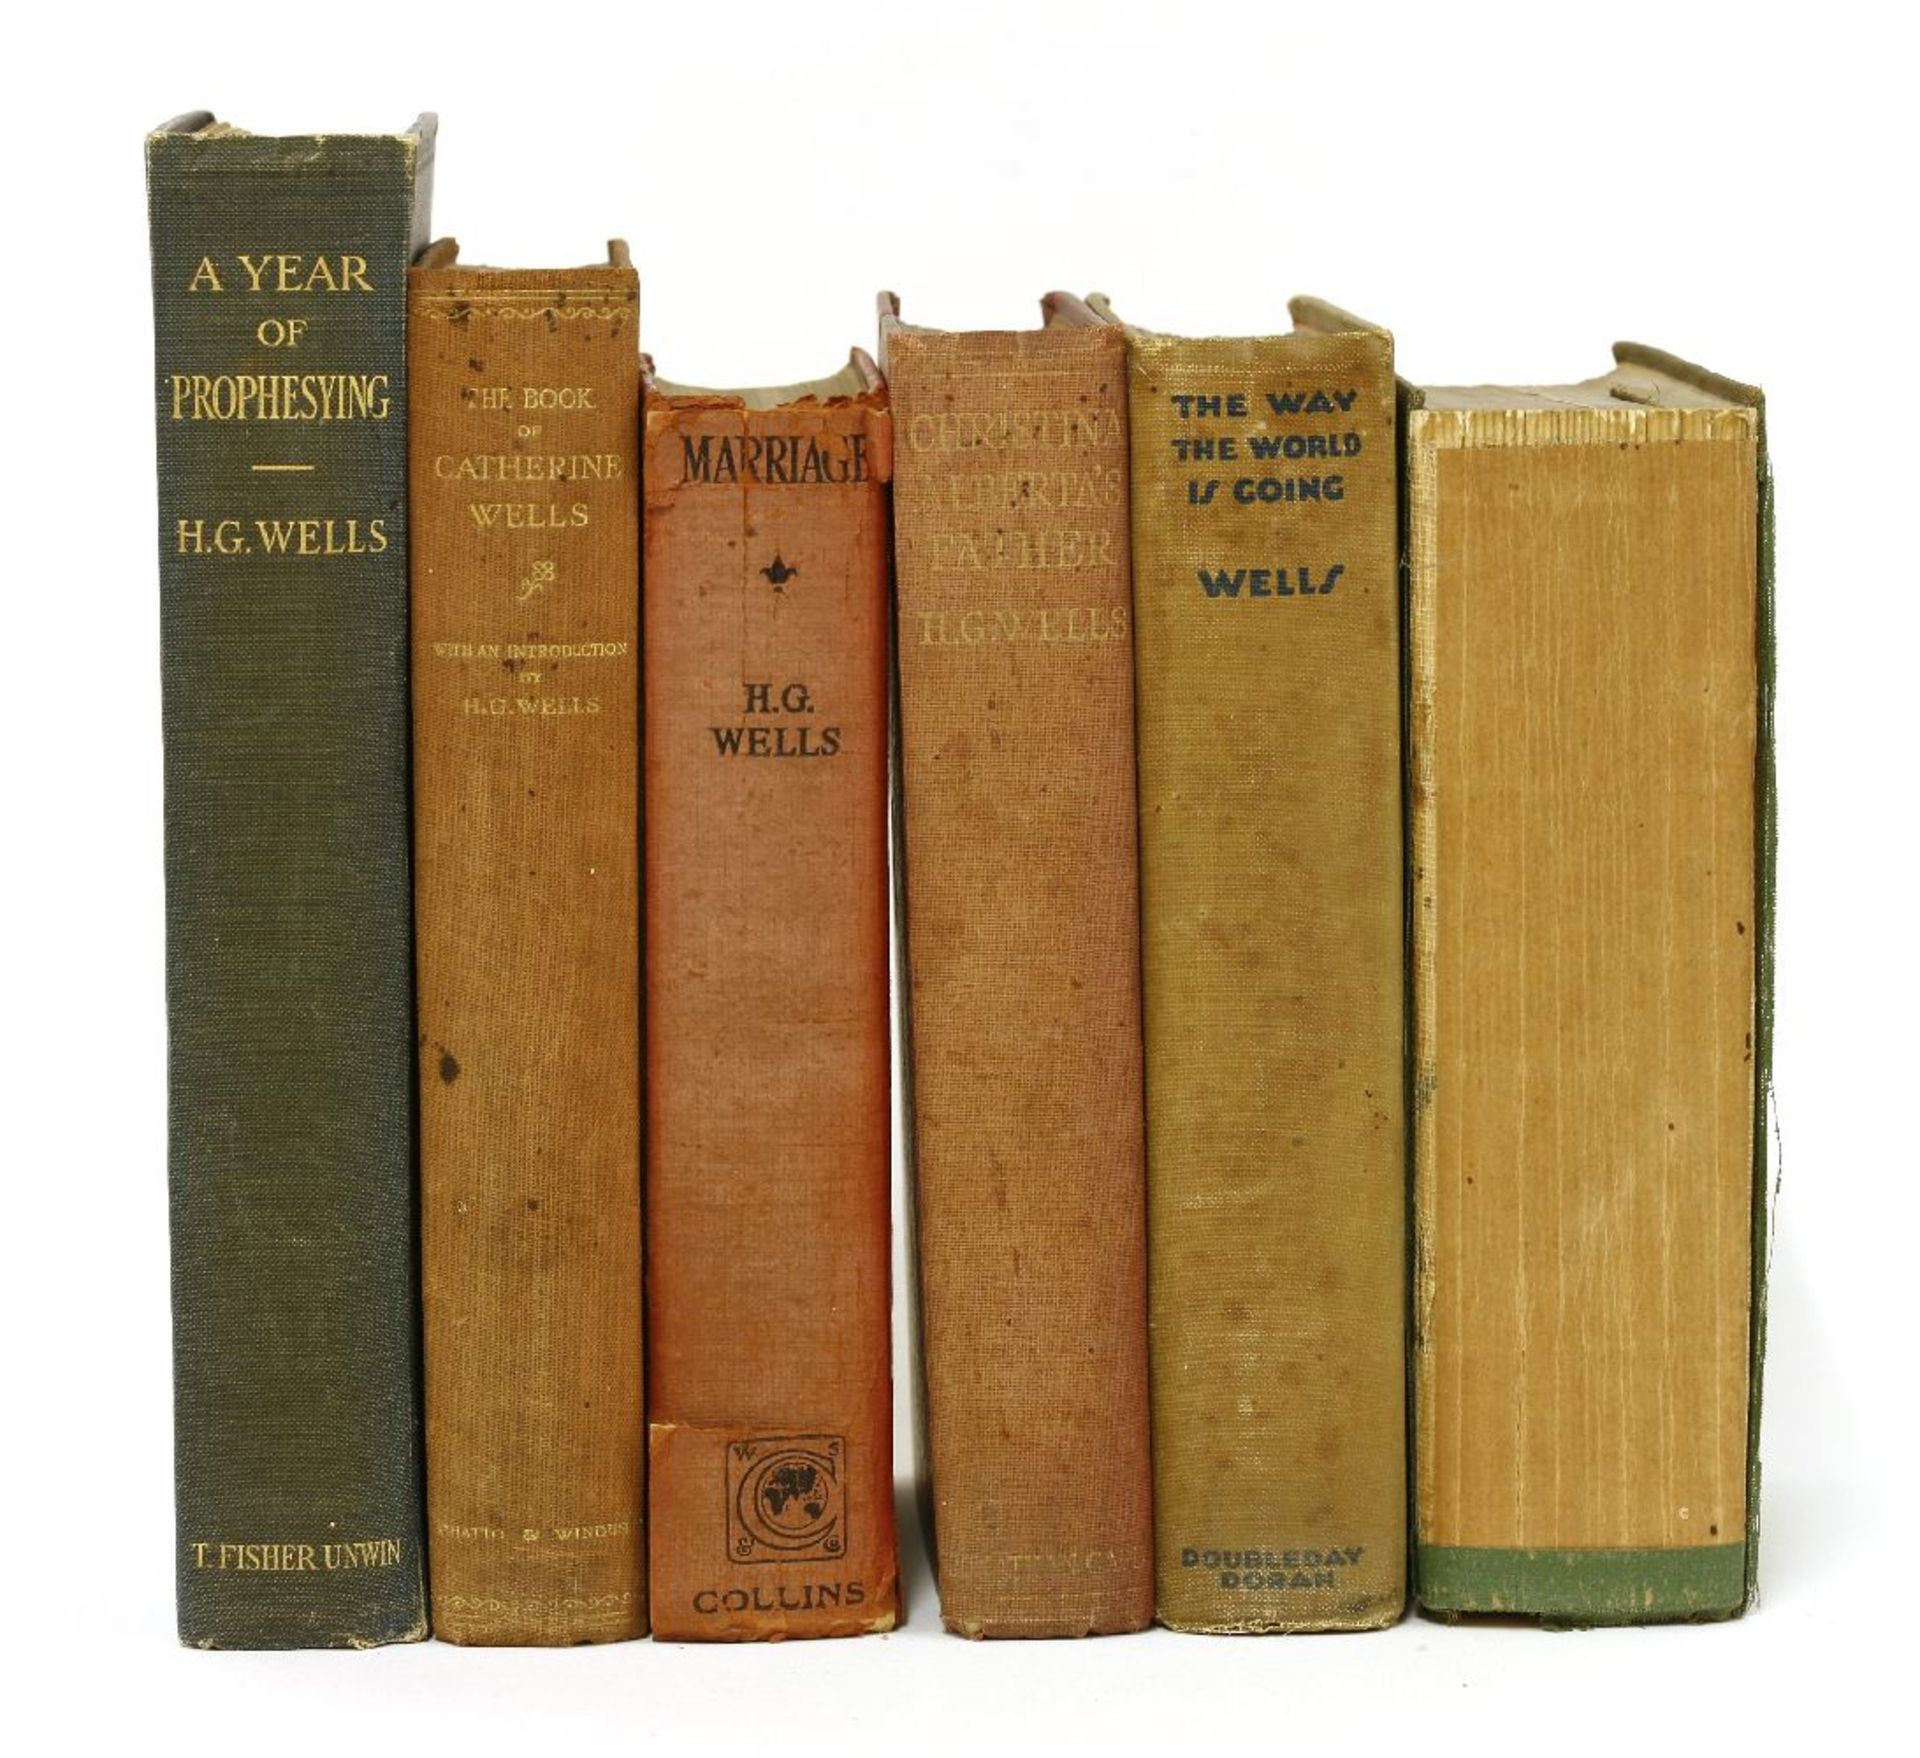 NINE works by H. G. WELLS, All Inscribed And Signed to the same family: 1- Marriage. W. Collins